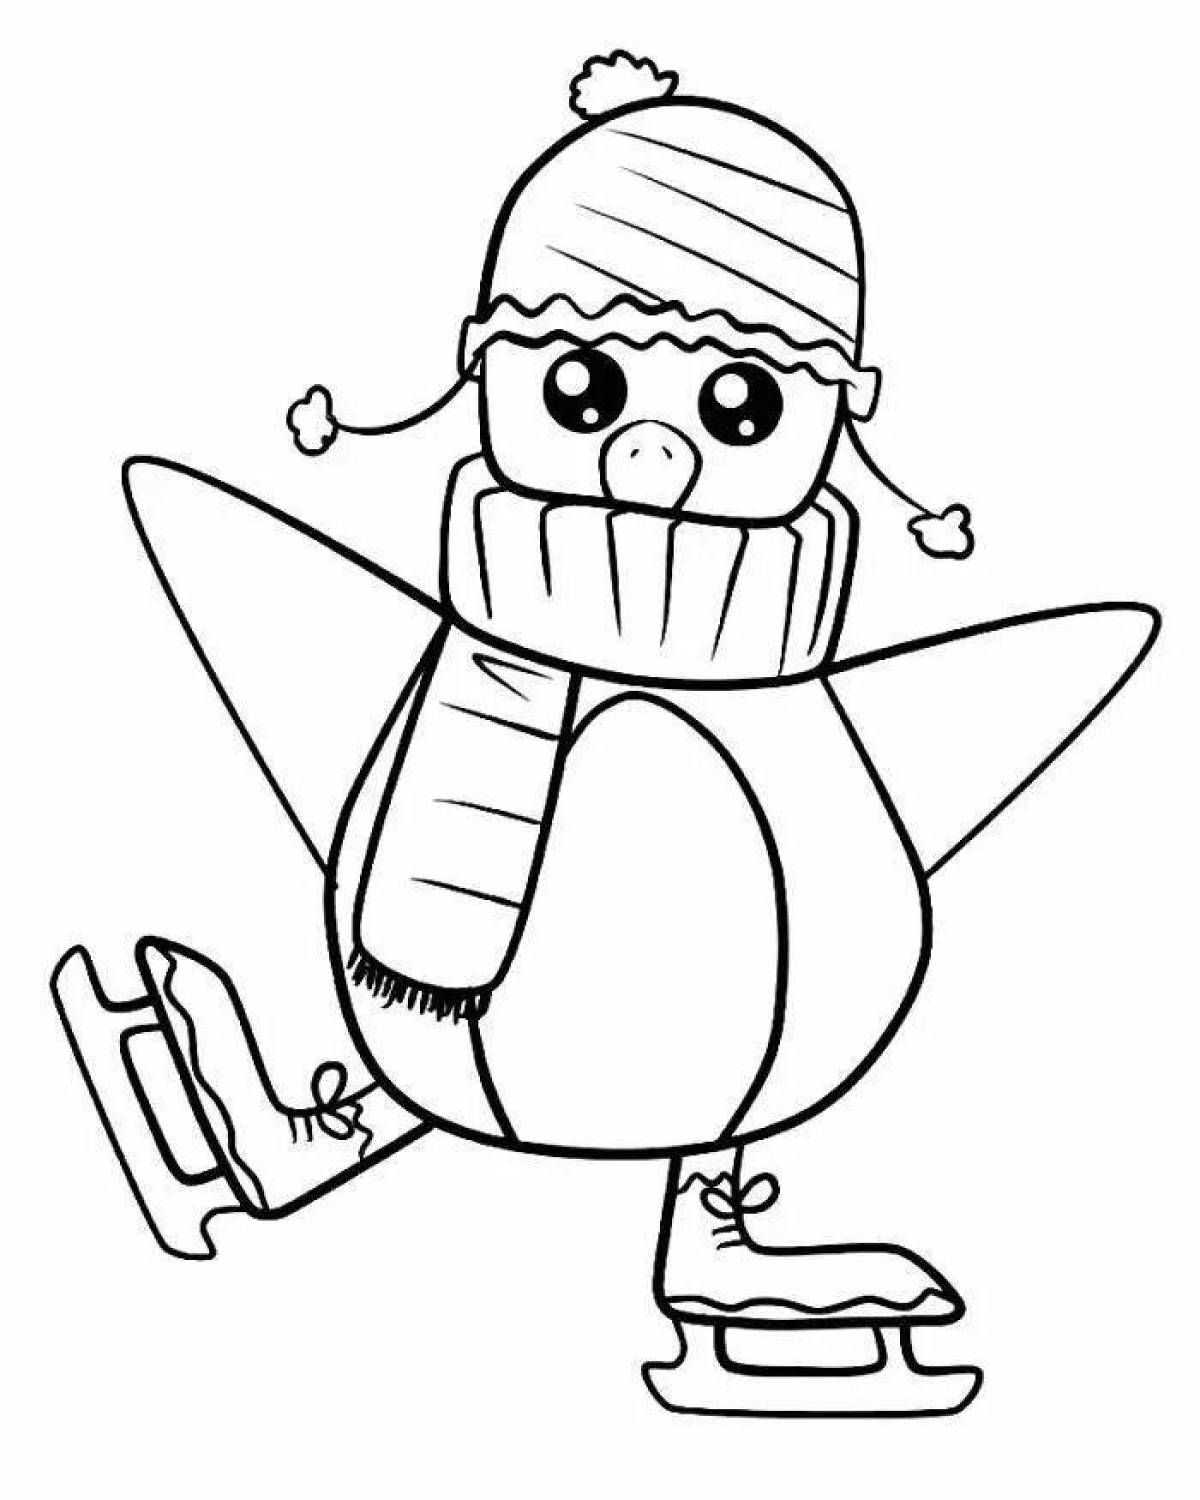 Gorgeous Christmas penguin coloring page